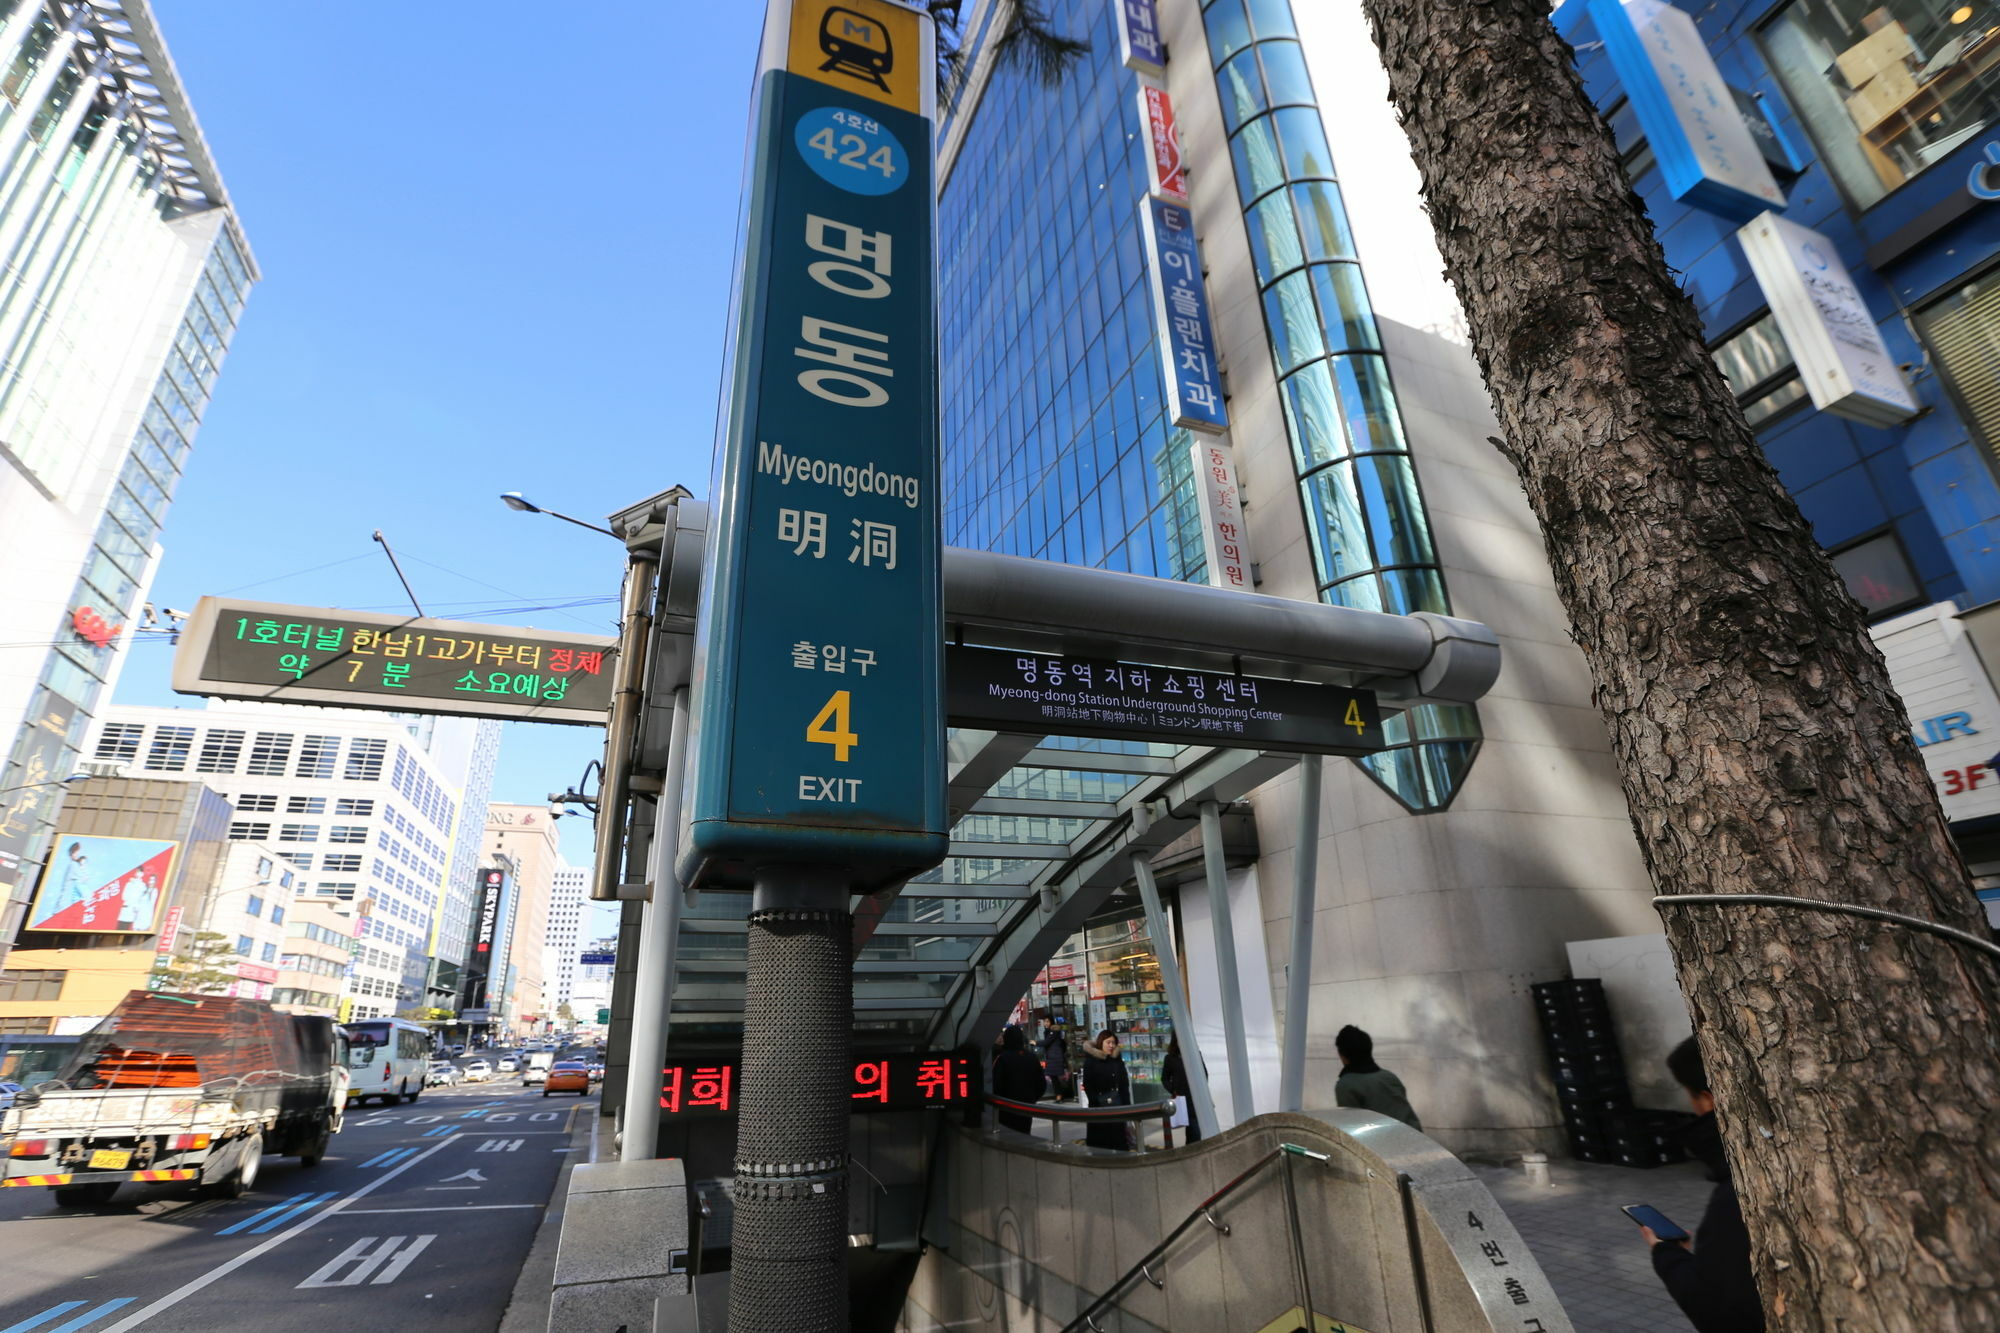 Philstay Myeongdong Boutique Female Seul Exterior foto